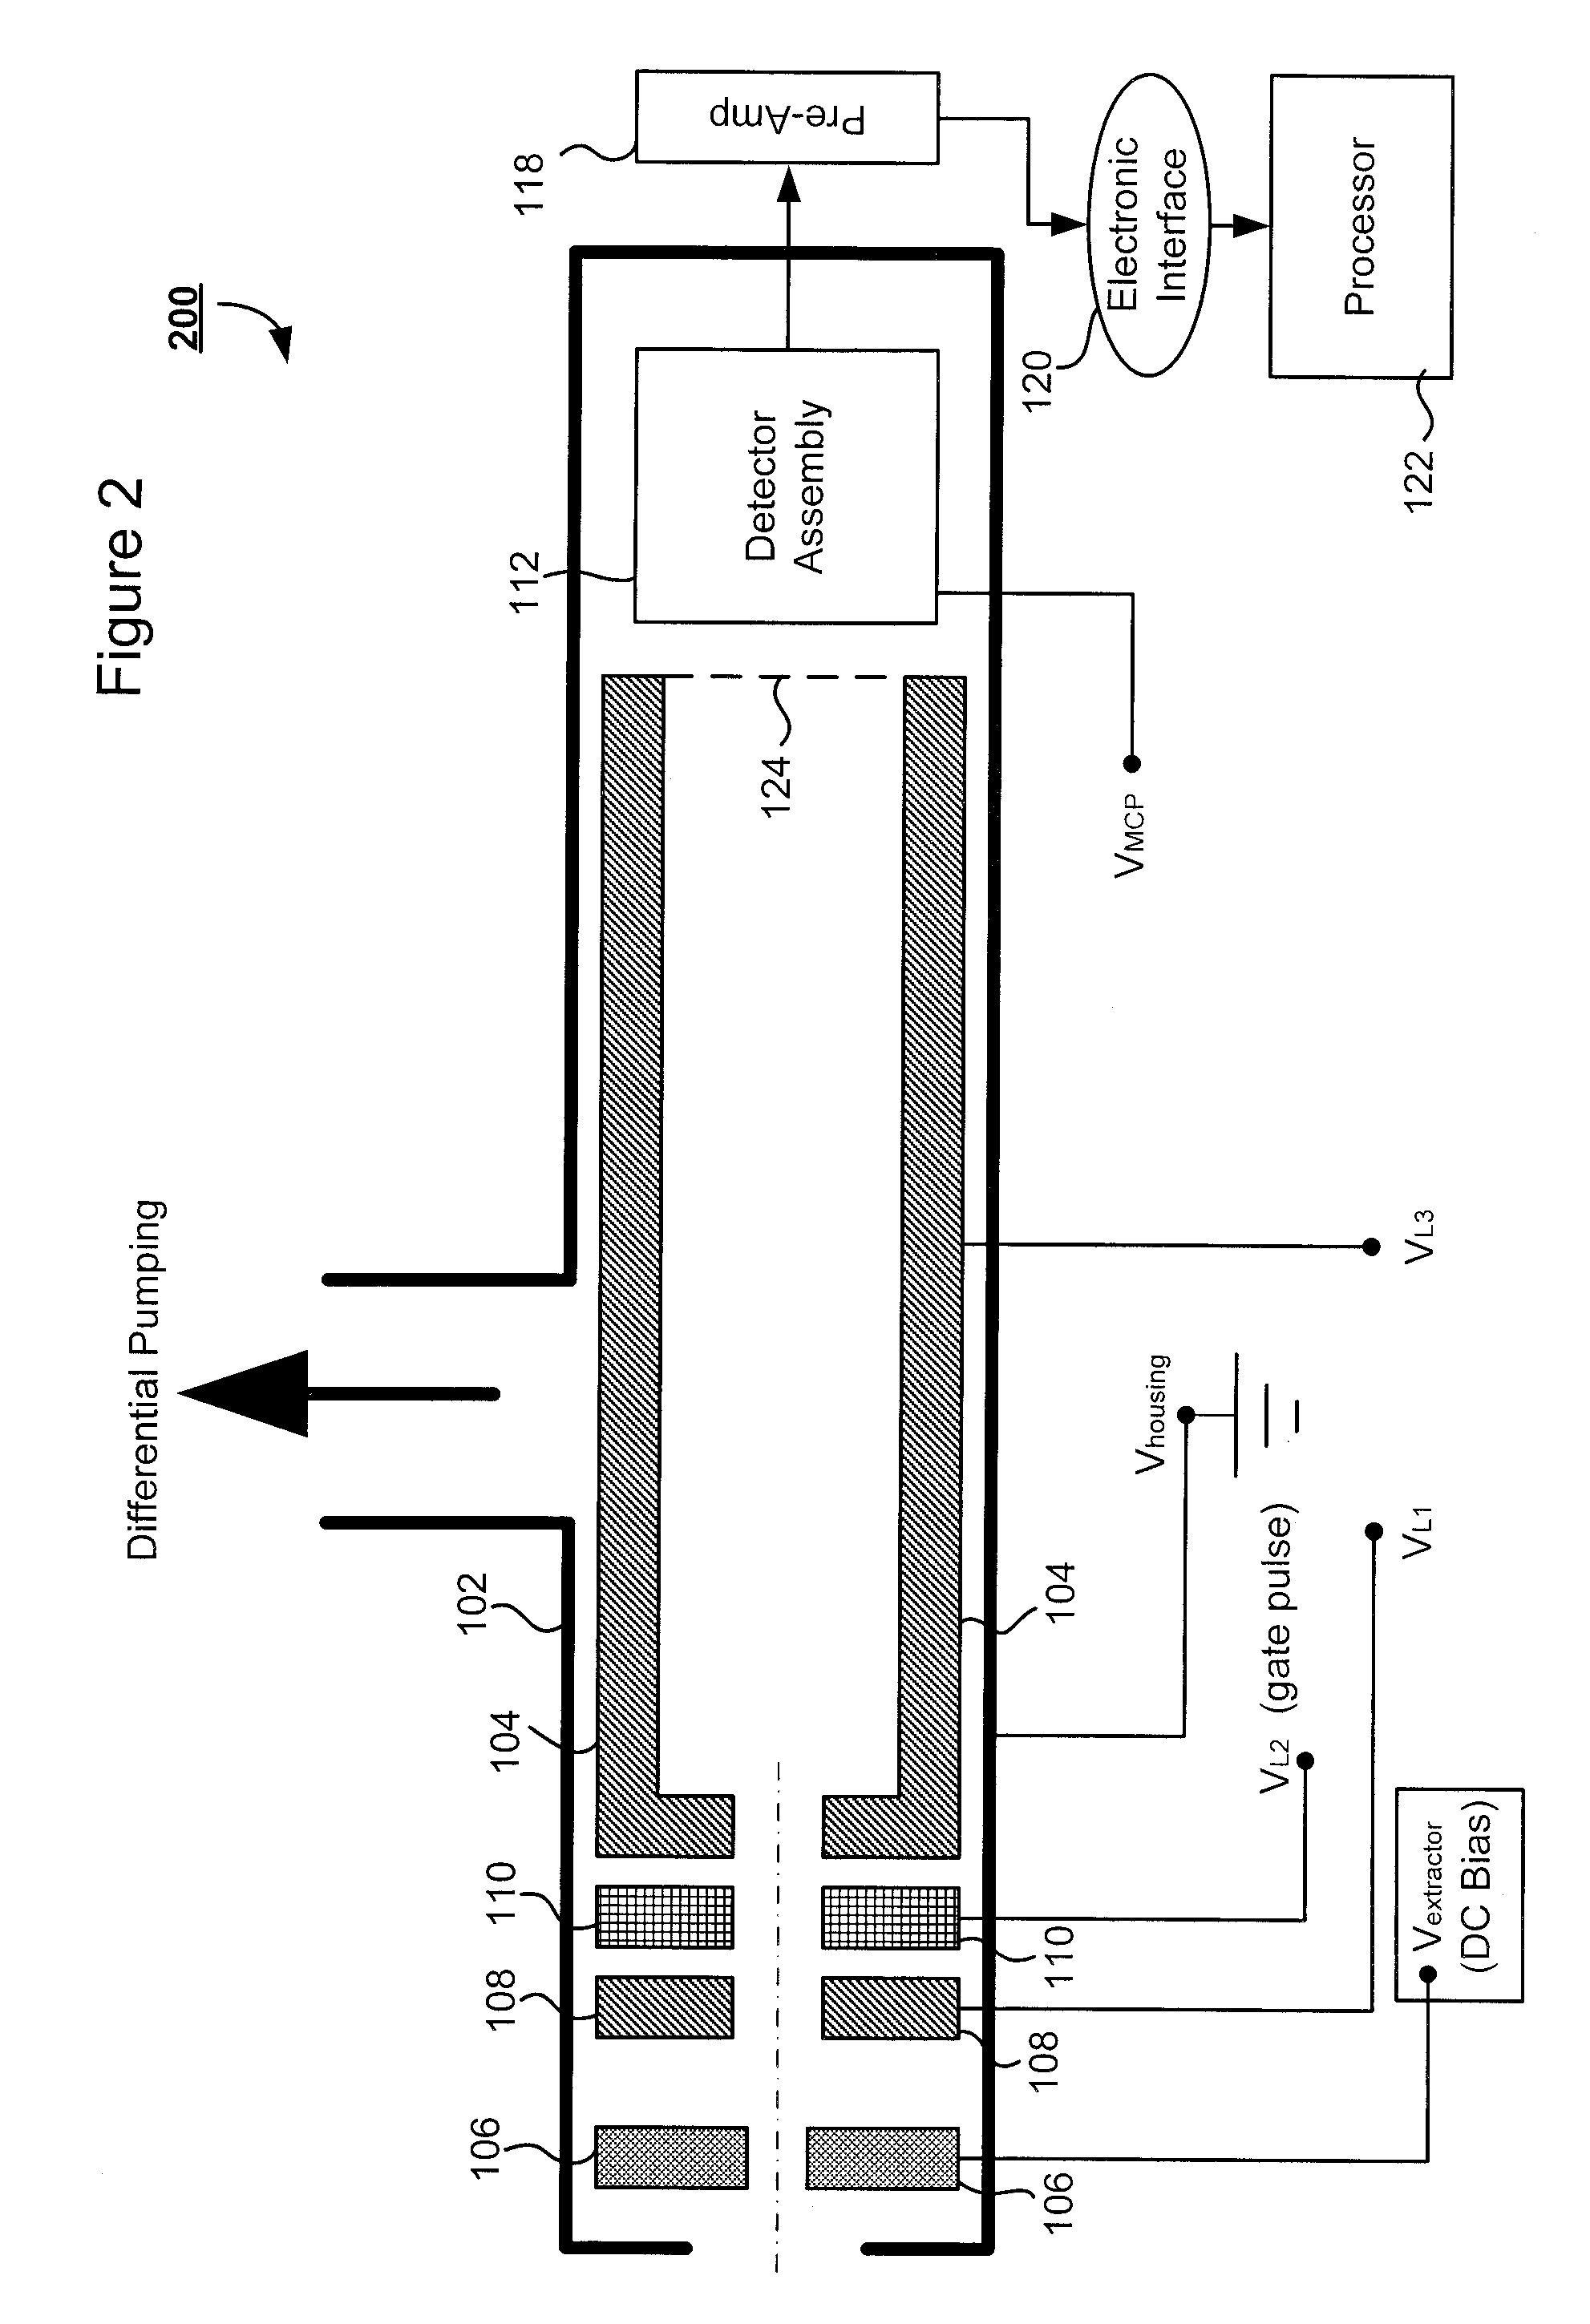 Technique for monitoring and controlling a plasma process